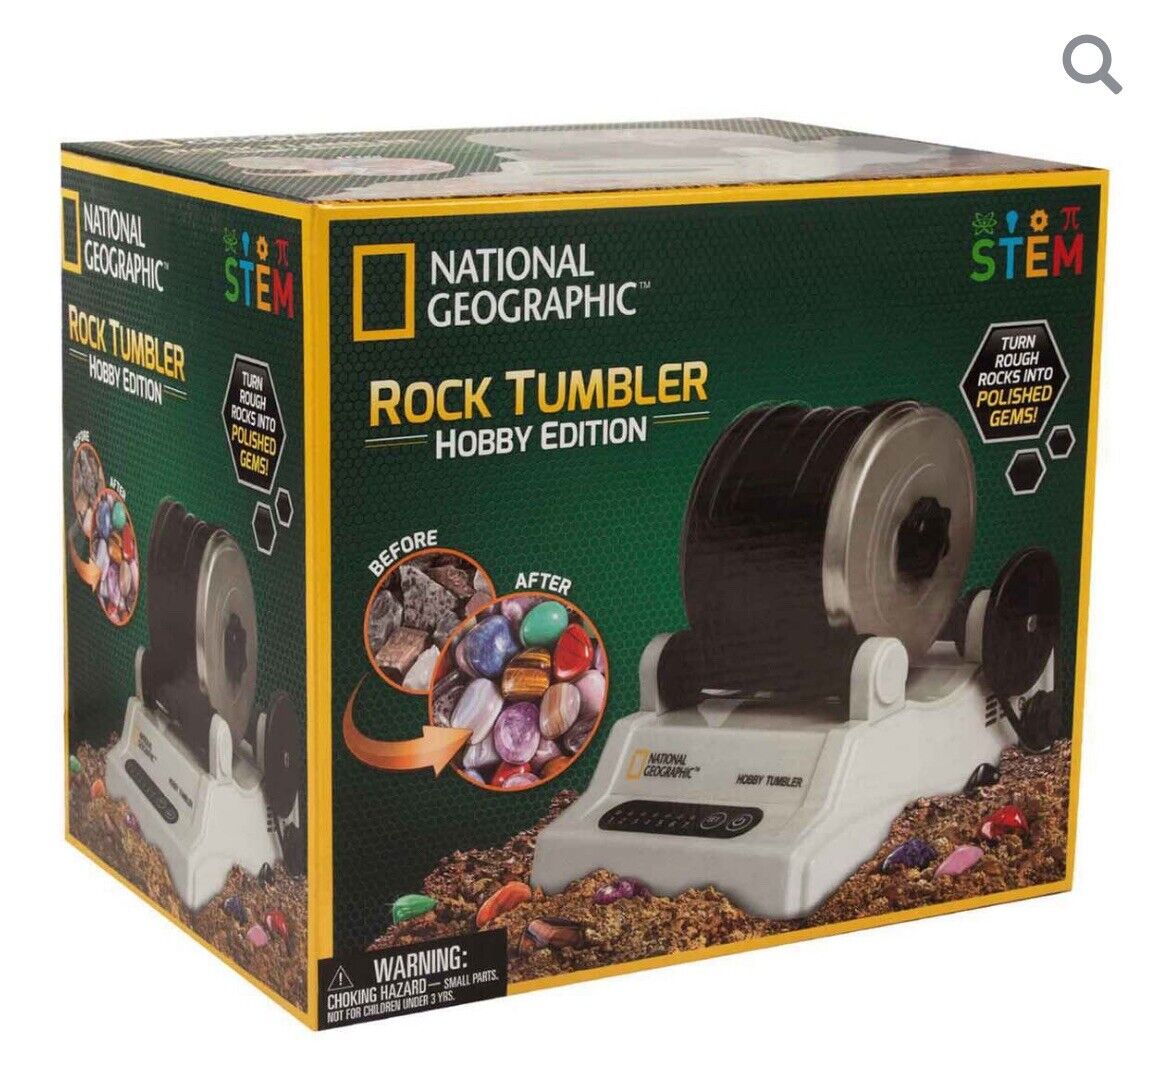 National Geographic Rock Tumbler Hobby Edition Kit